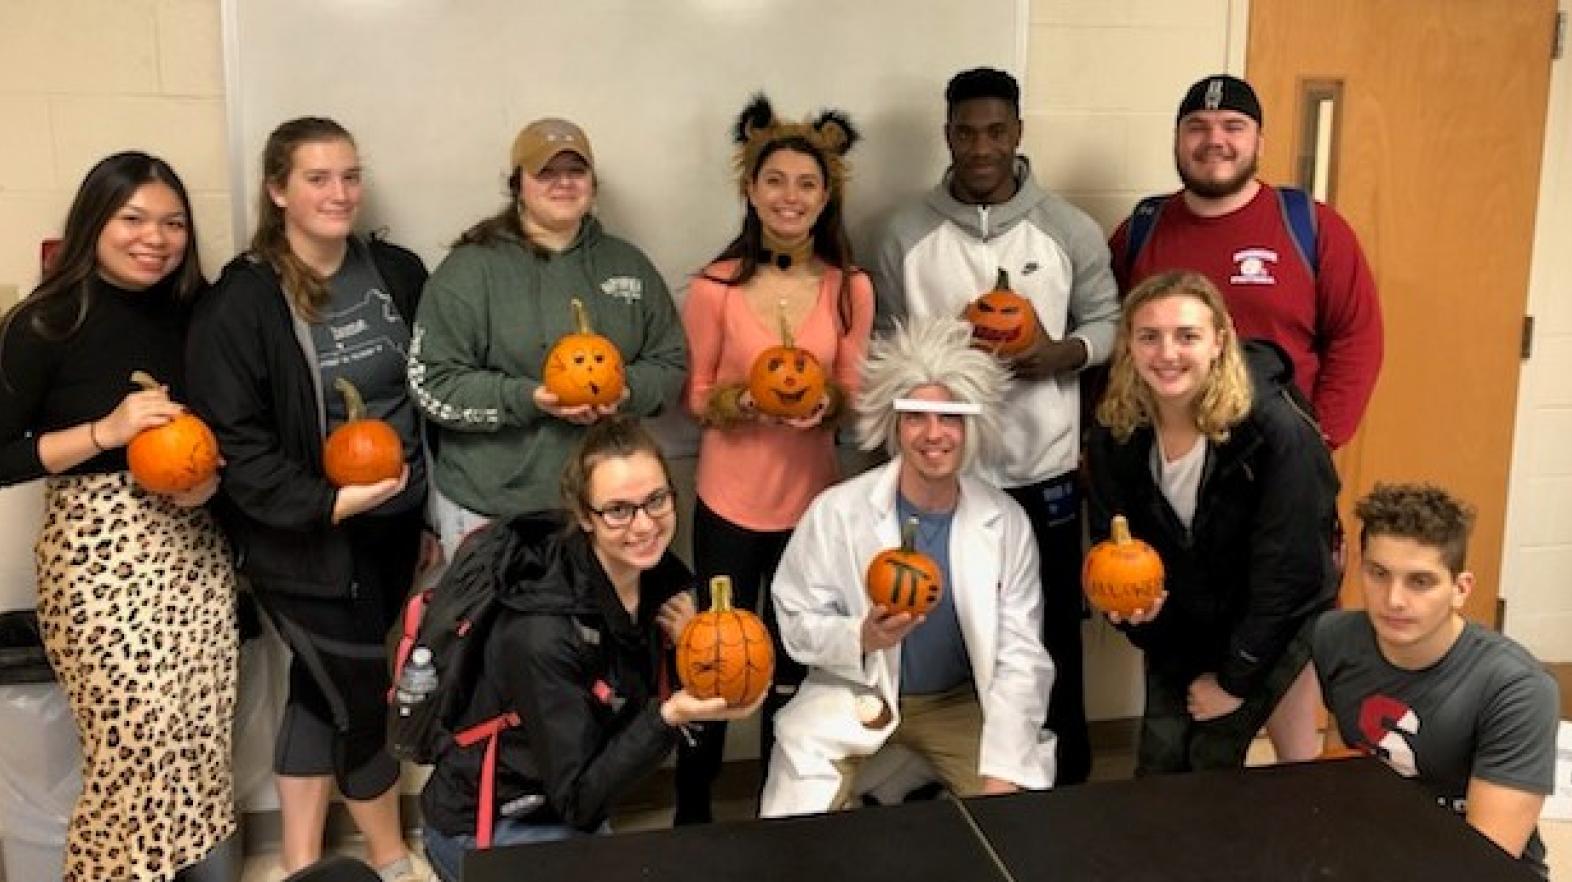 Students in the Department of Mathematics, Physics, and Computer Science participate in a Pumpkin contest at Halloween